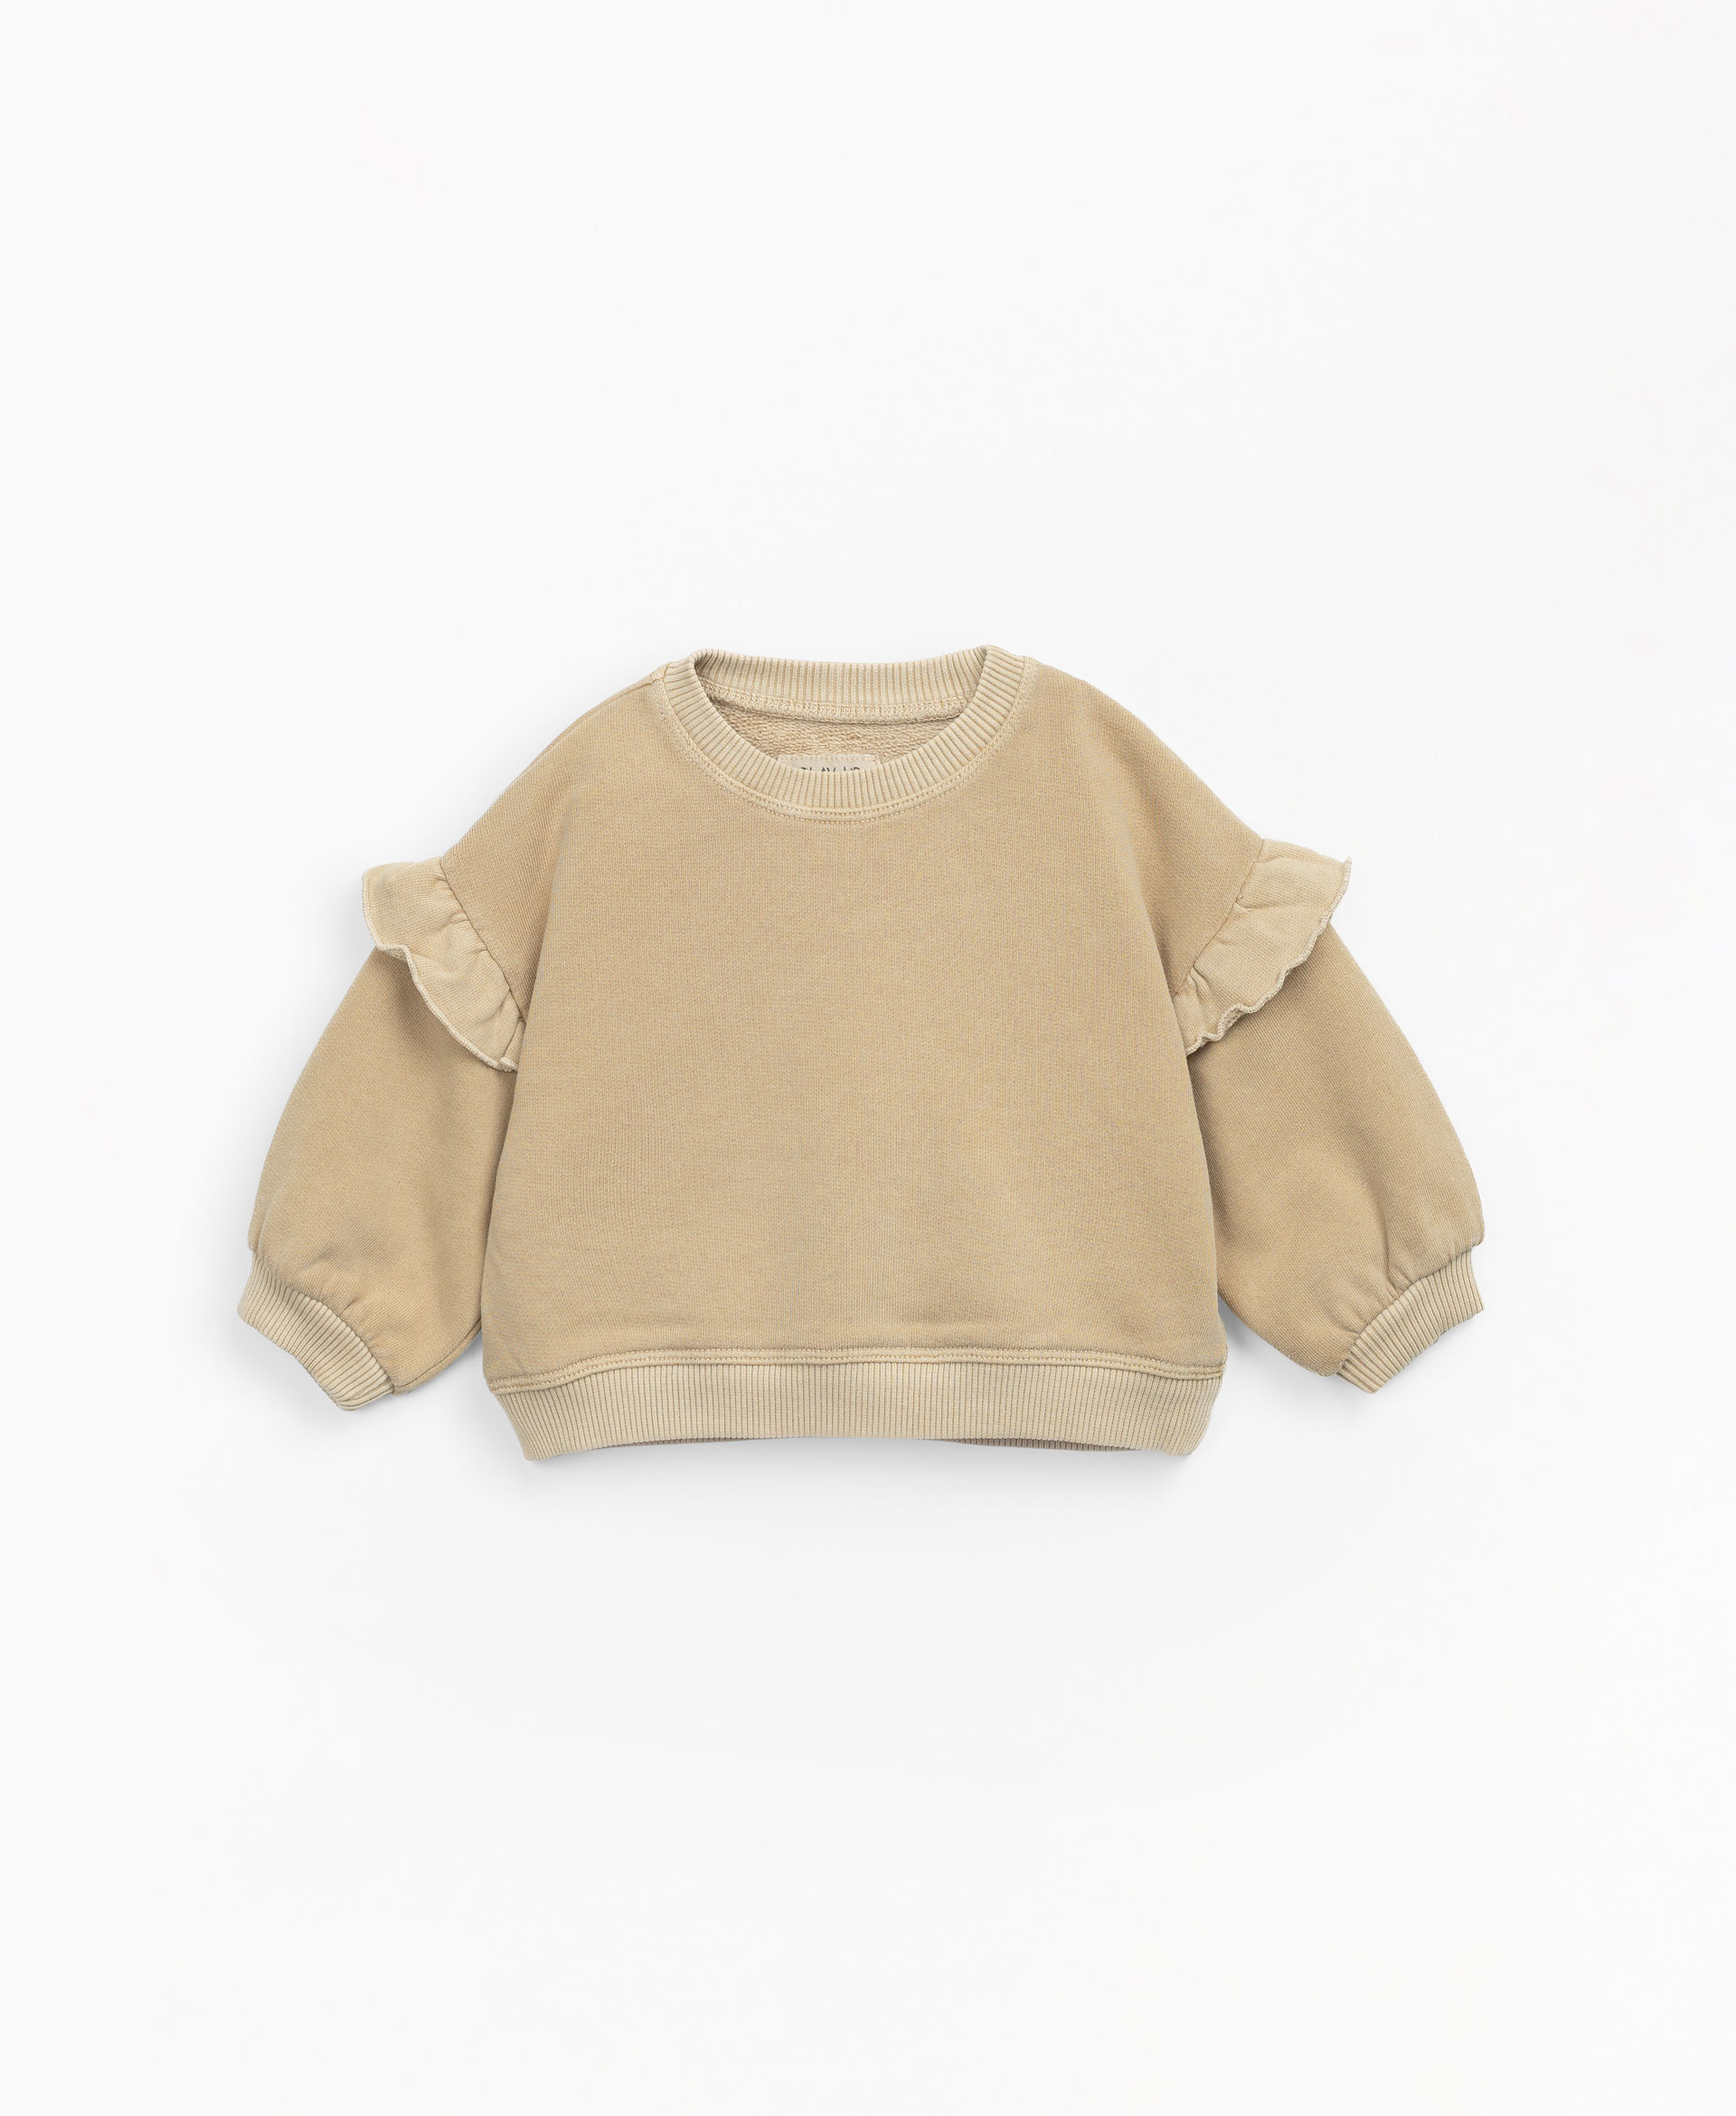 Naturally dyed sweater | Mother Lcia